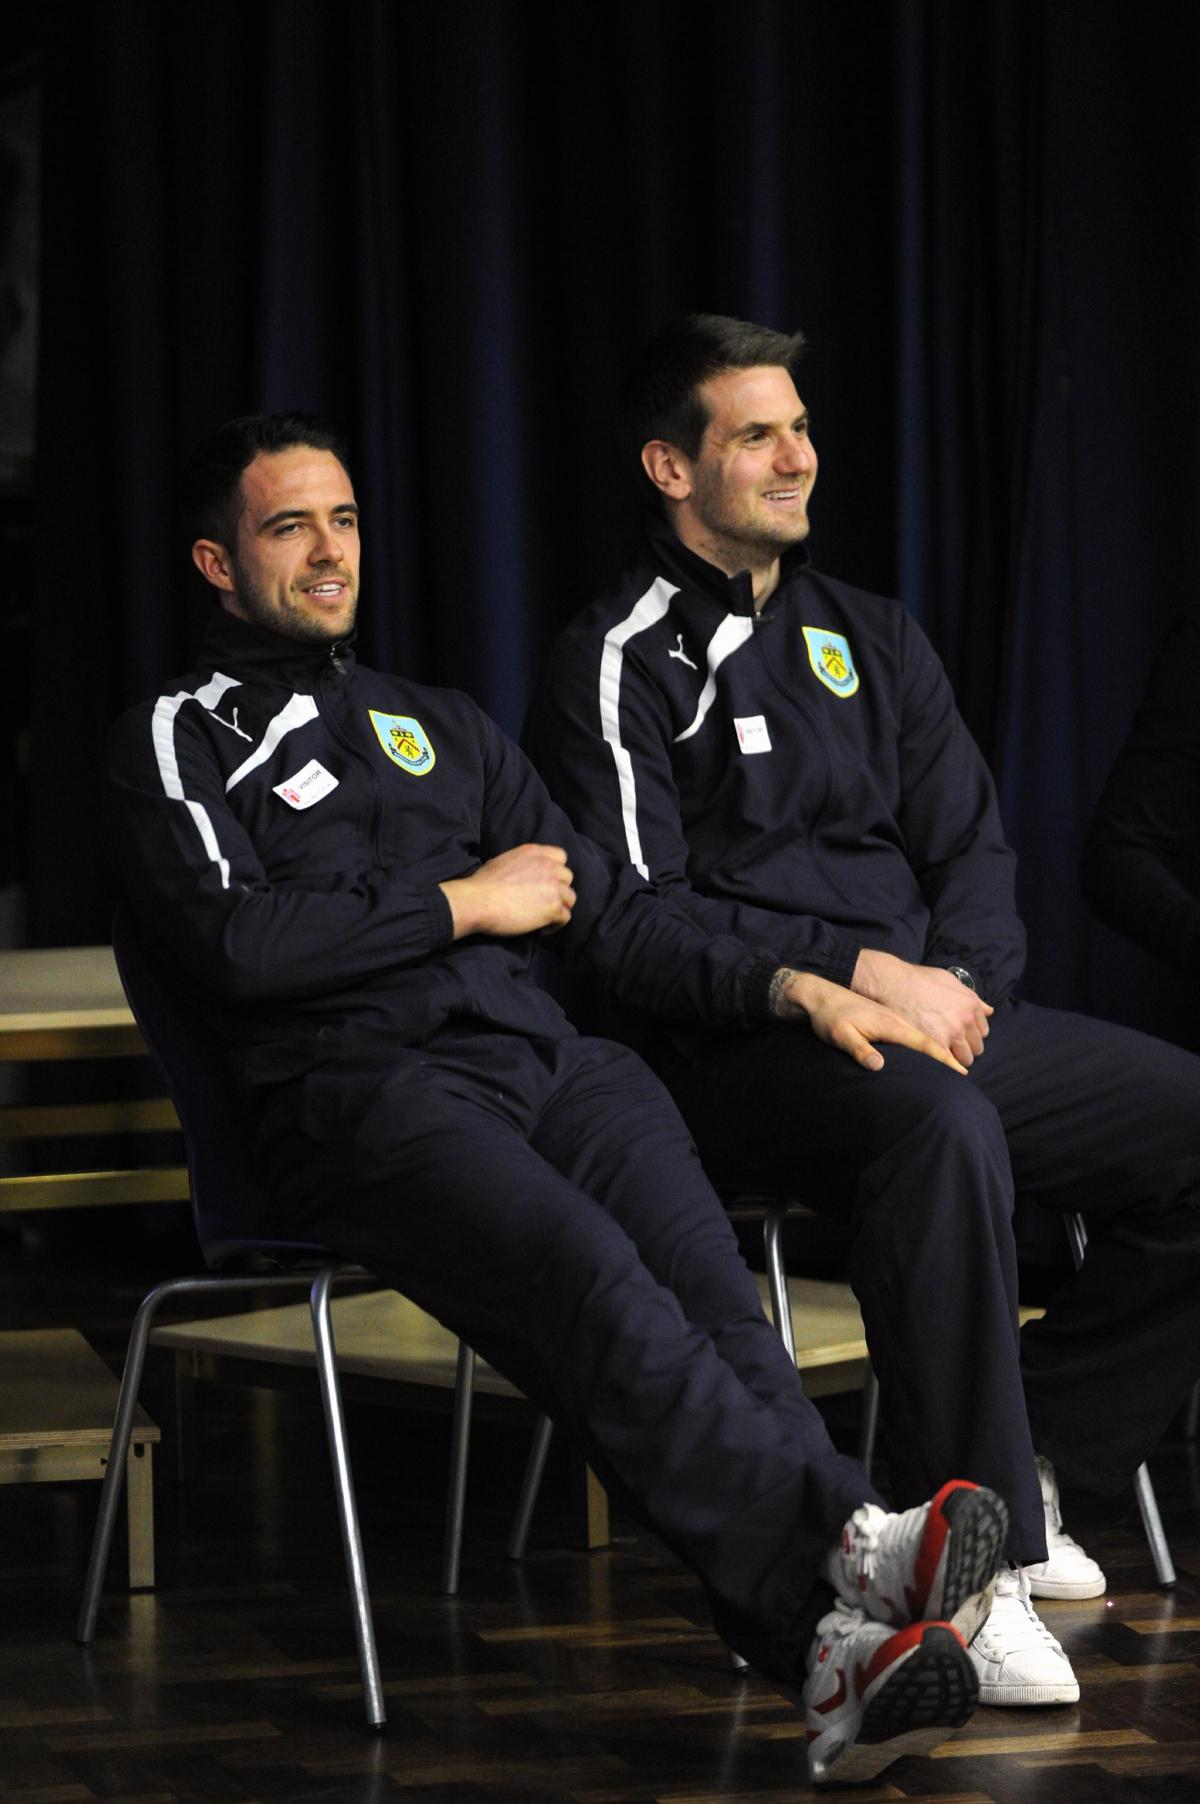 Burnley Co-Chairman John Banaszkiewicz visits his old school in Colne. Also present at Fishermore High School were first team coach Ian Woan and players Danny Ings and Tom Heaton.